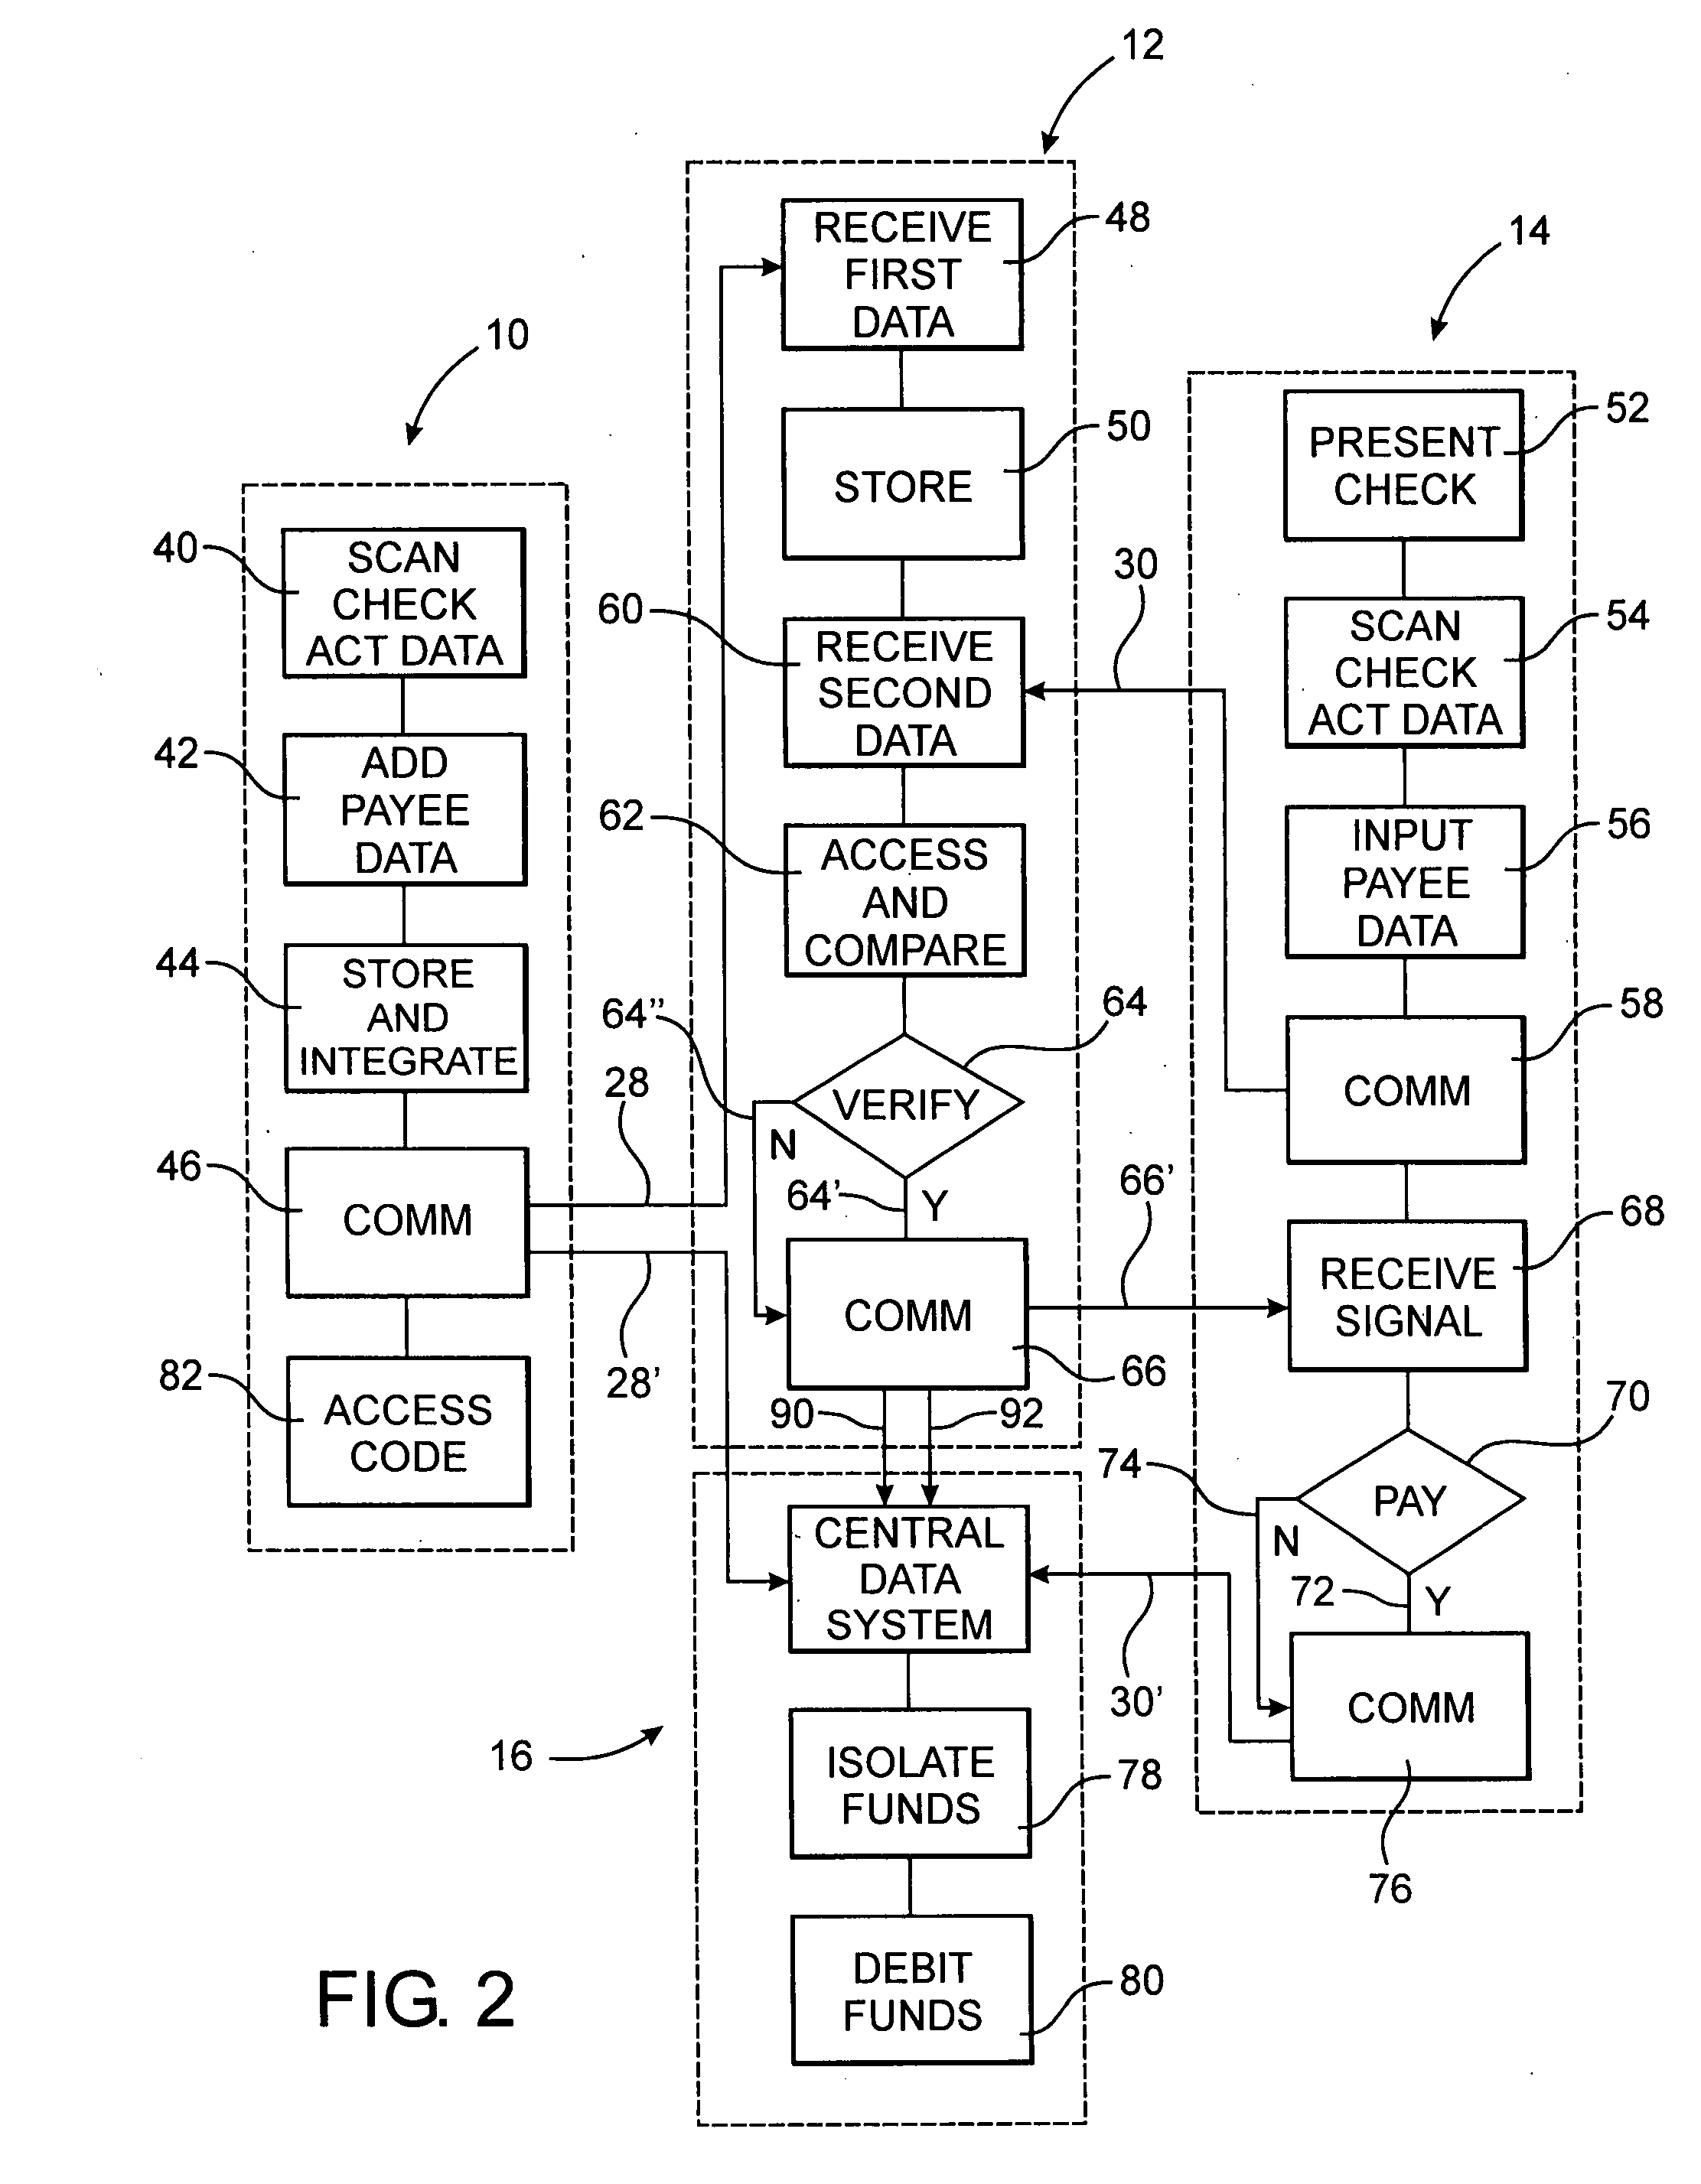 System and method for verifying the authenticity of a check and authorizing payment thereof